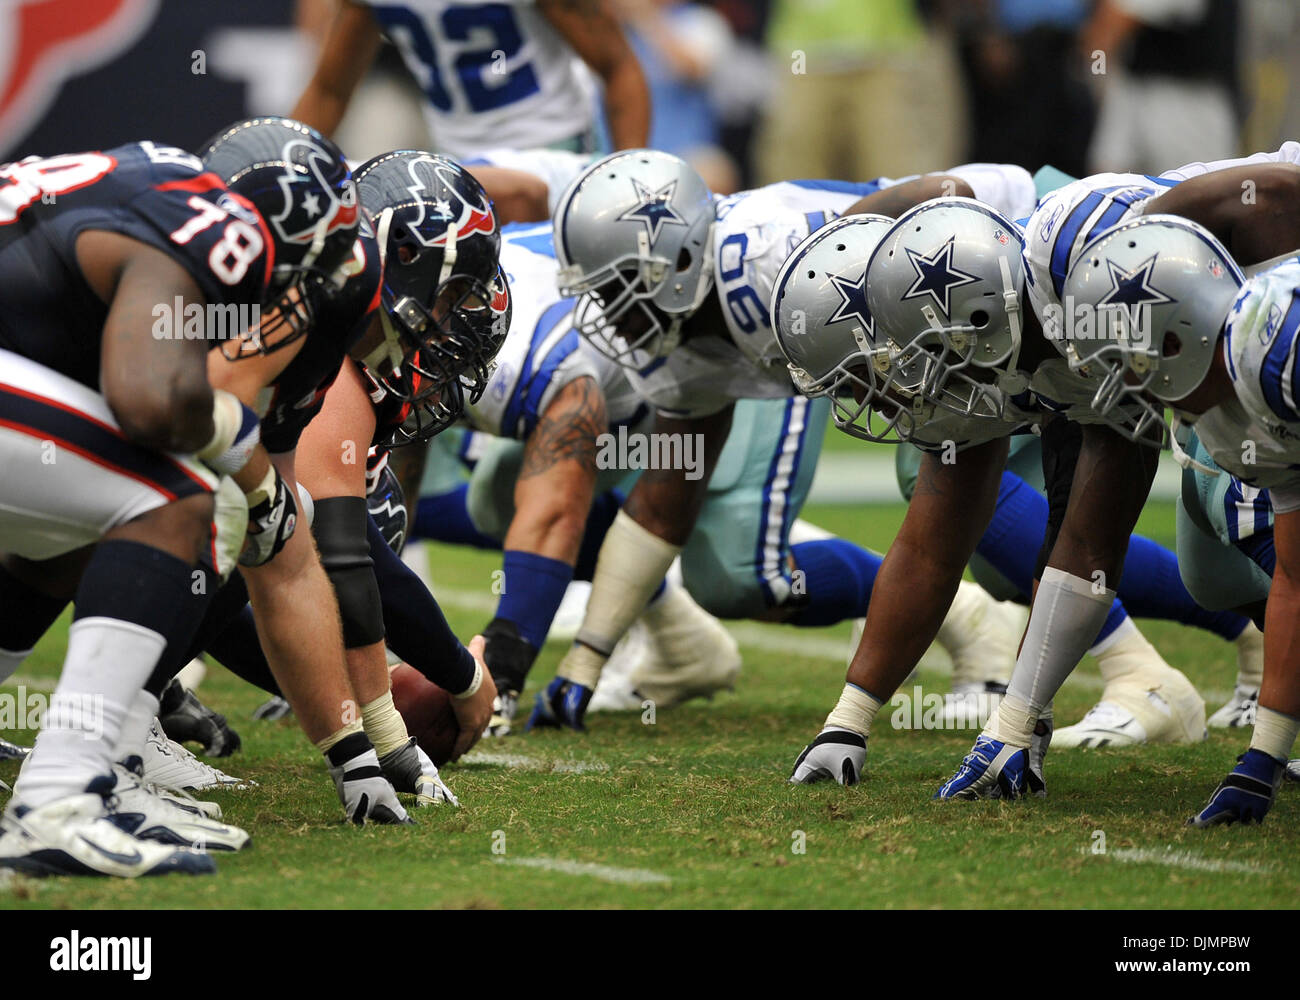 Sept. 26, 2010 - Houston, TX, USA - 26 September 2010: The game between the Dallas Cowboys and the Houston Texans at Reliant Stadium in Houston, Texas. Cowboys wins against the Texans 27-13. (Credit Image: © Patrick Green/Southcreek Global/ZUMApress.com) Stock Photo